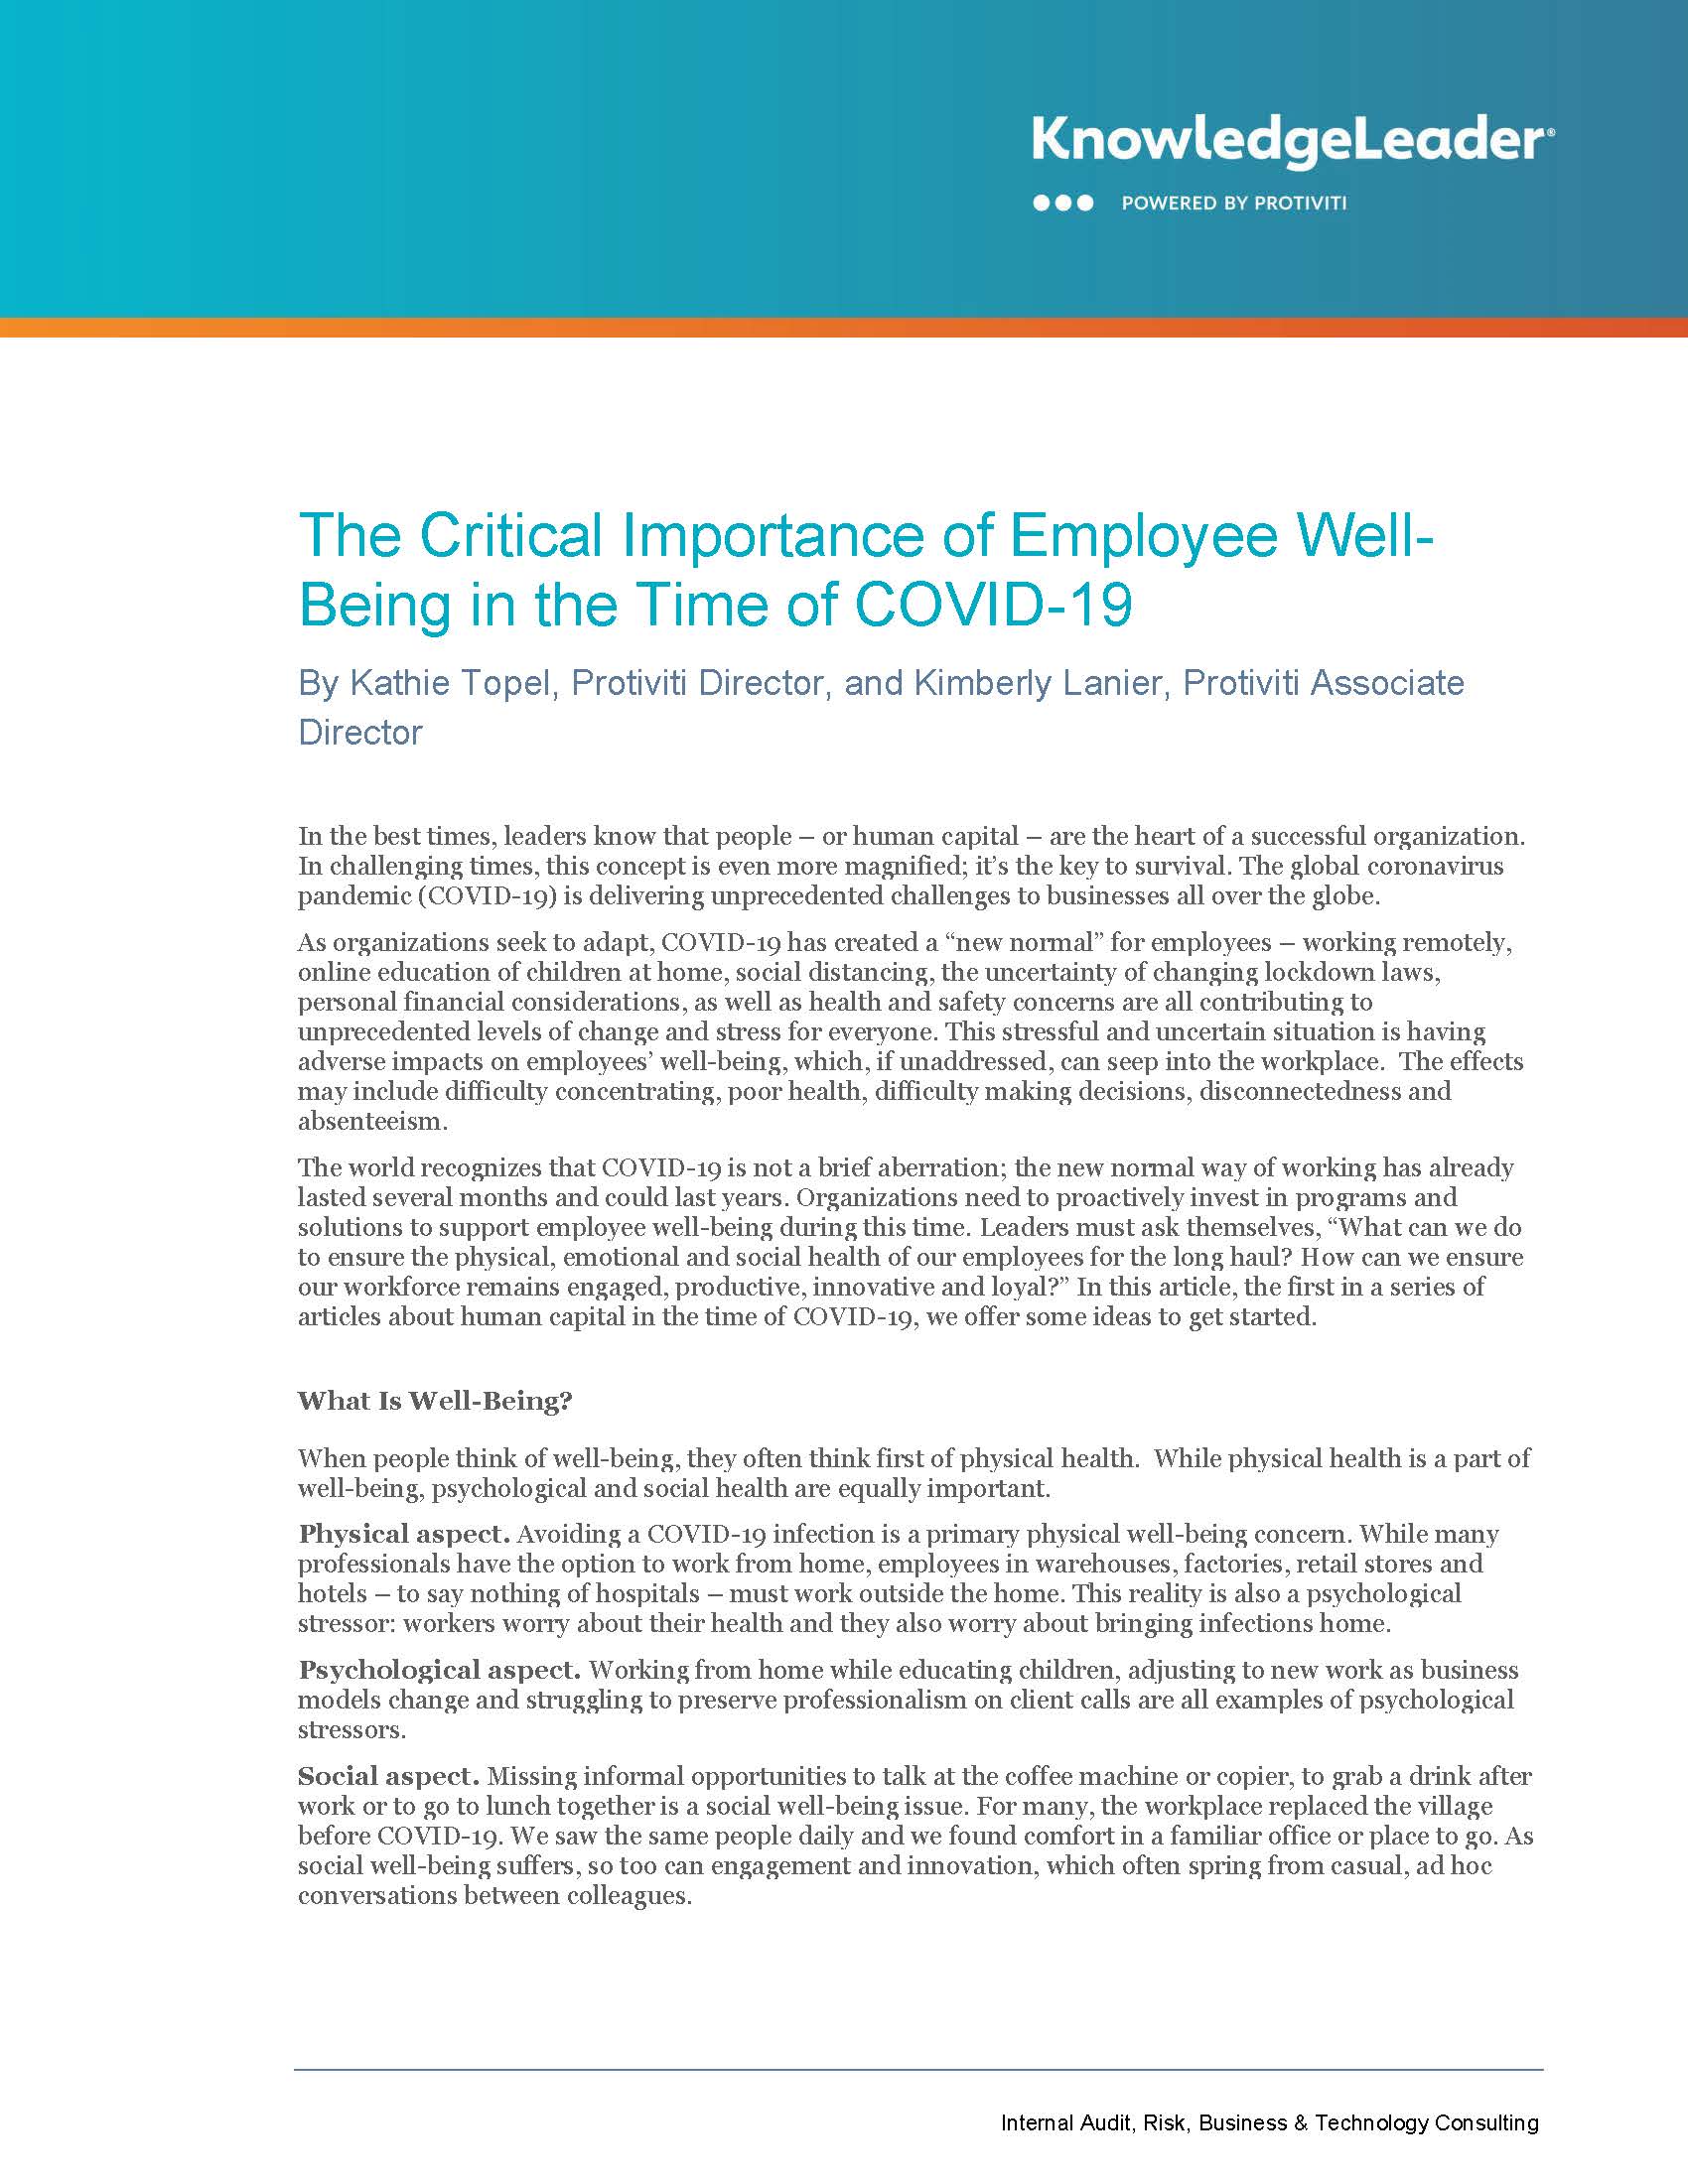 Screenshot of the first page of The Critical Importance of Employee Well-Being in the Time of COVID-19